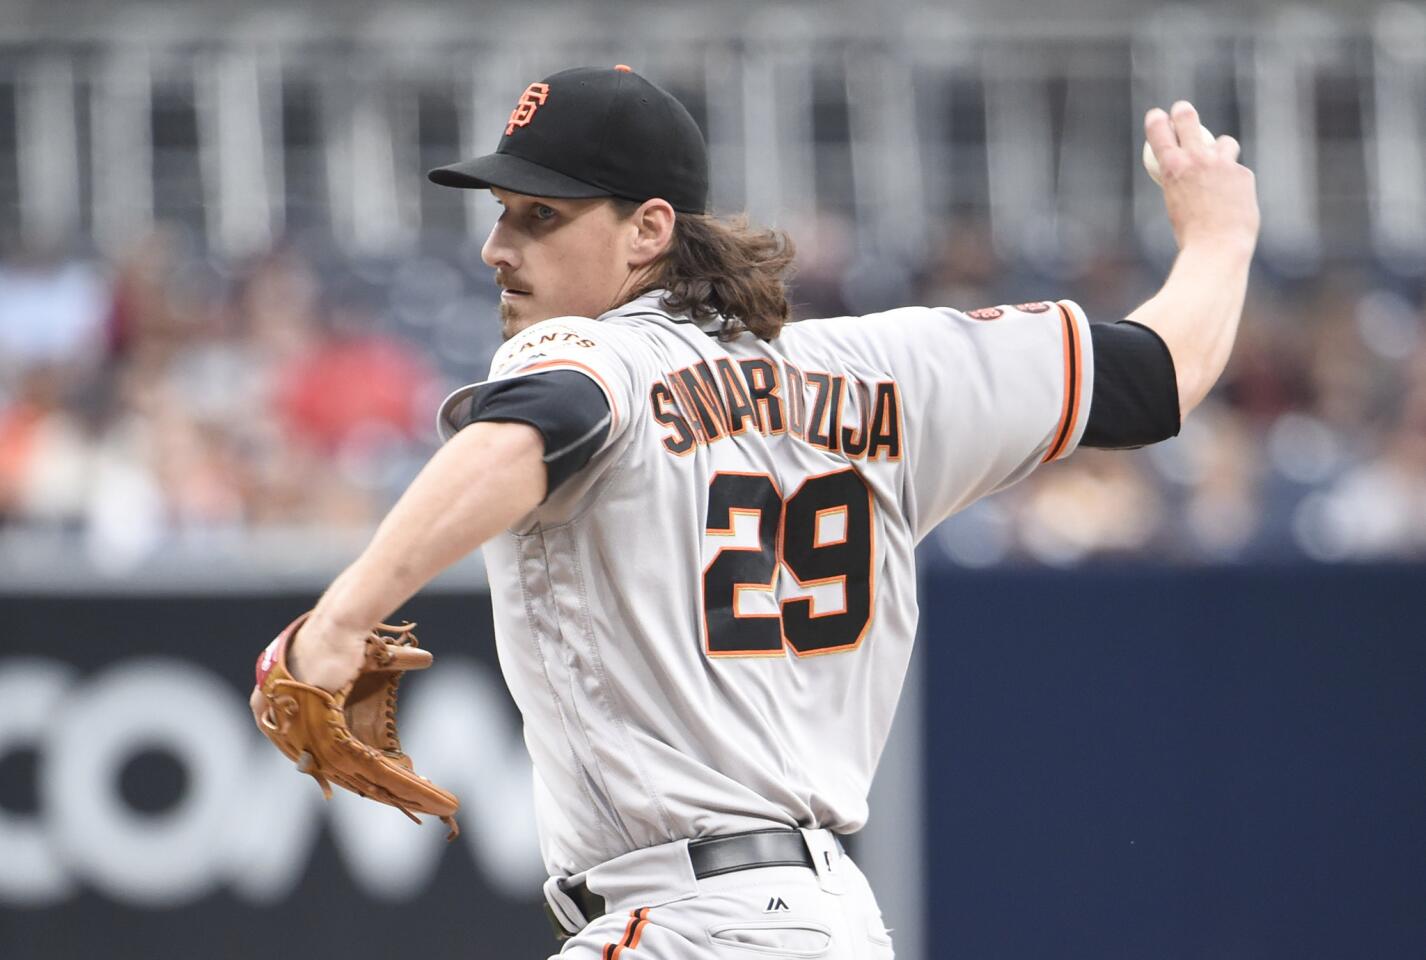 Jeff Samardzija pitches during the first inning against the Padres on May 19, 2016, in San Diego.